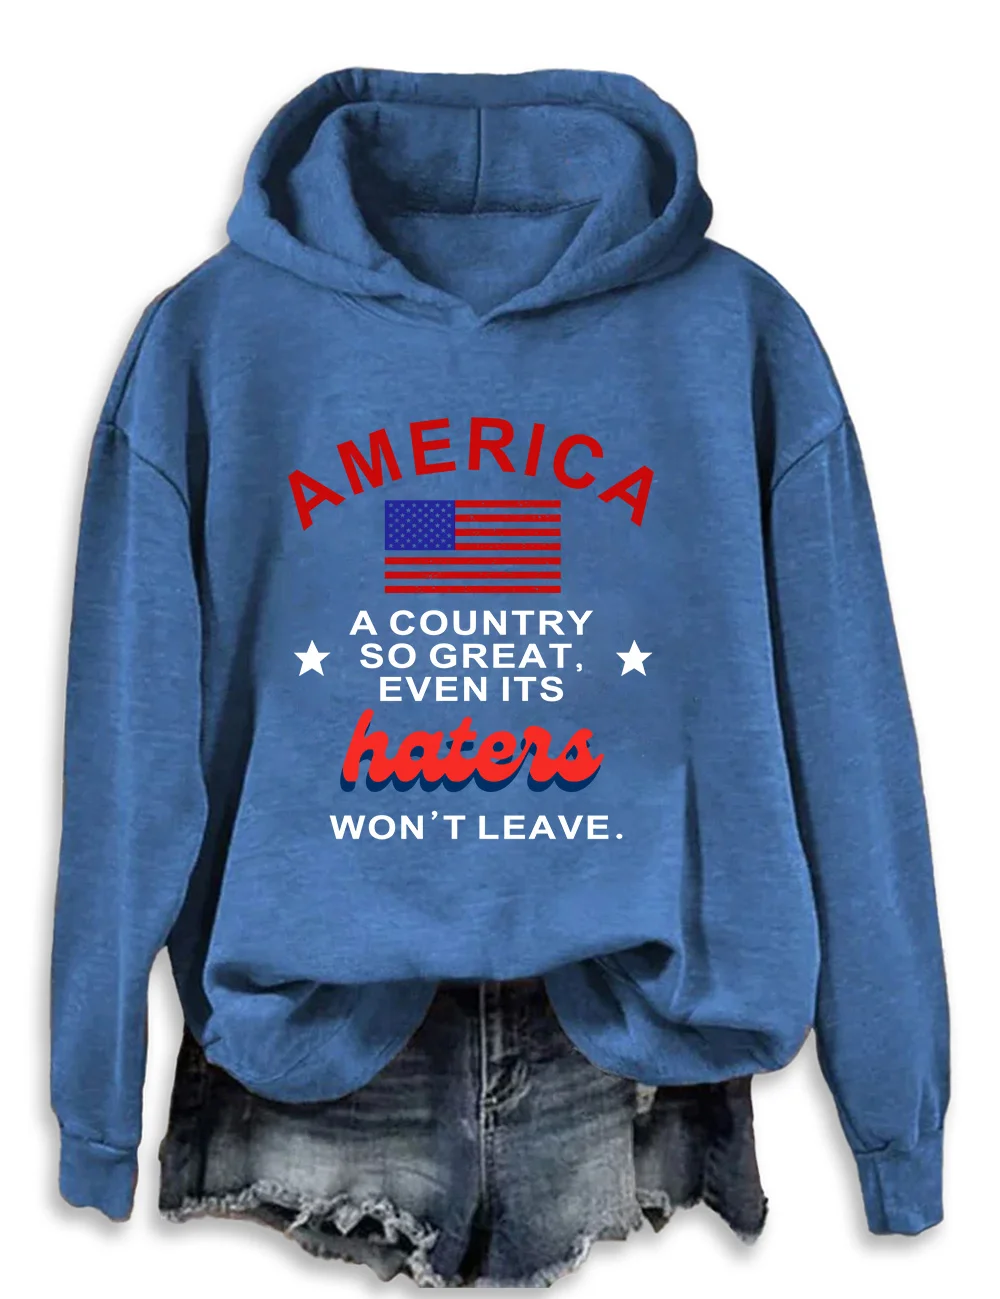 America A Country So Great Even Its Haters Won't Leave Hoodie